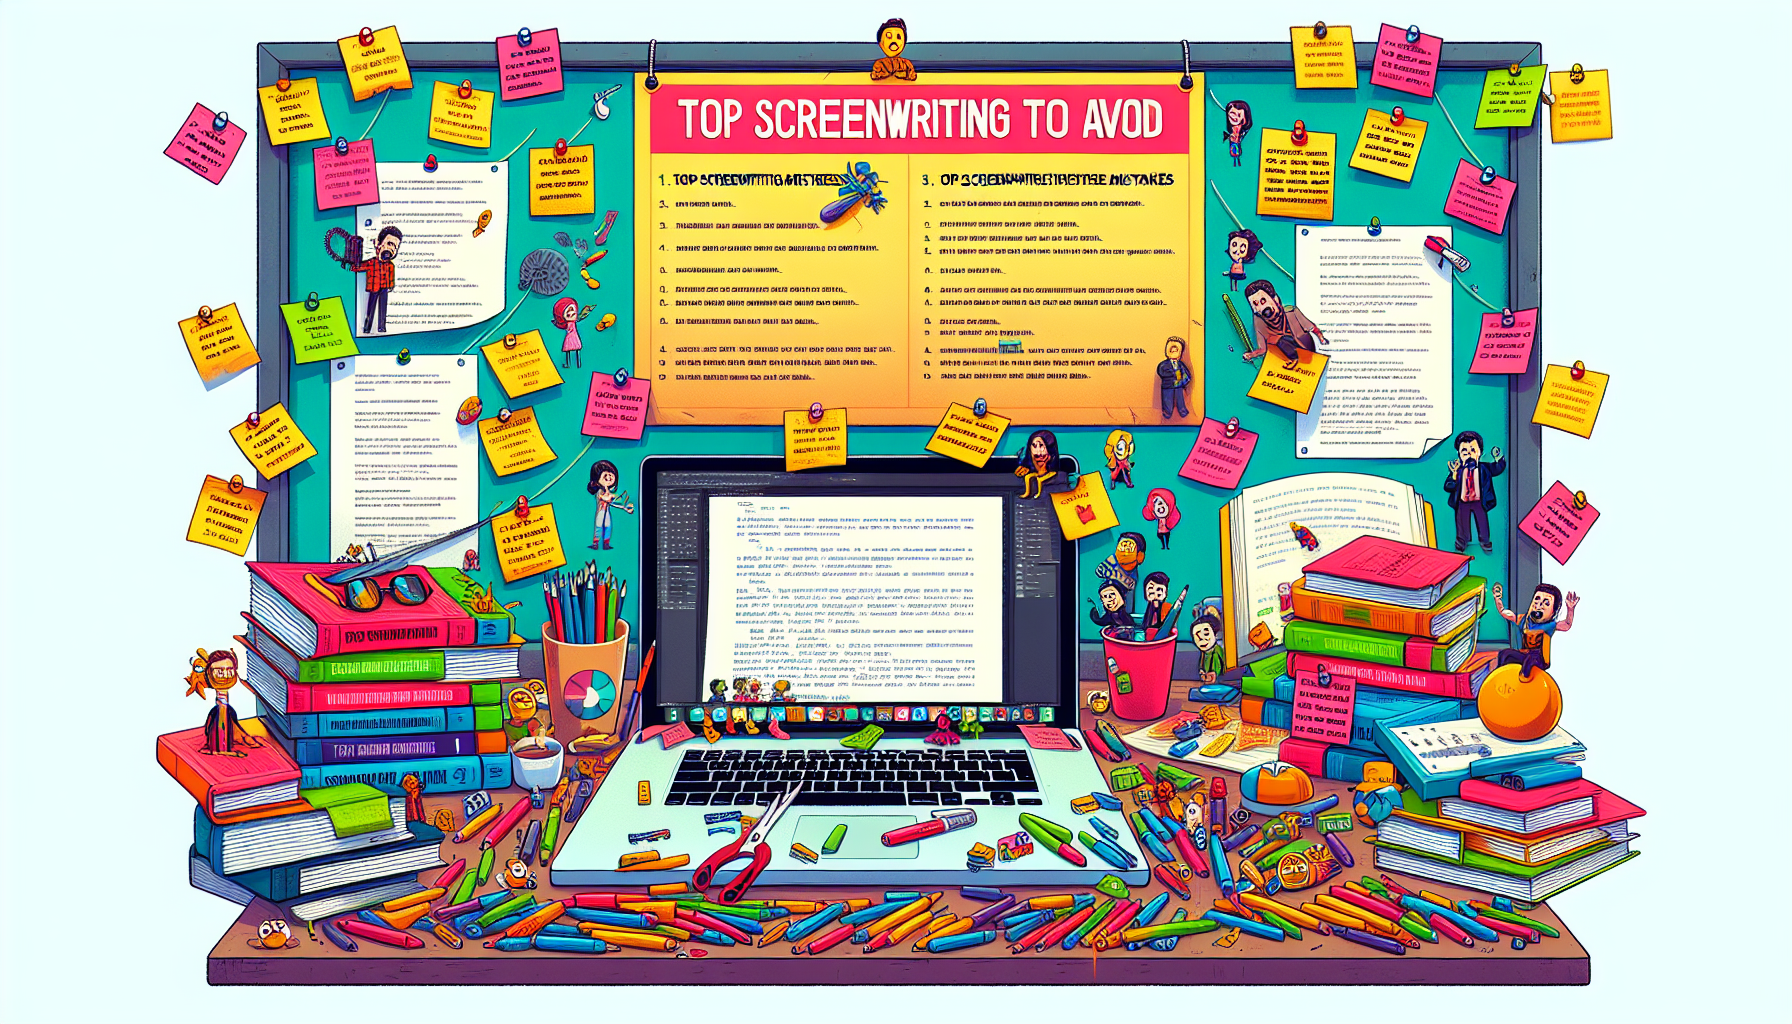 An artist's vibrant and whimsical illustration of a cluttered screenwriter's desk, featuring scattered screenplay drafts with visible corrections, a glowing laptop displaying screenwriting software, b